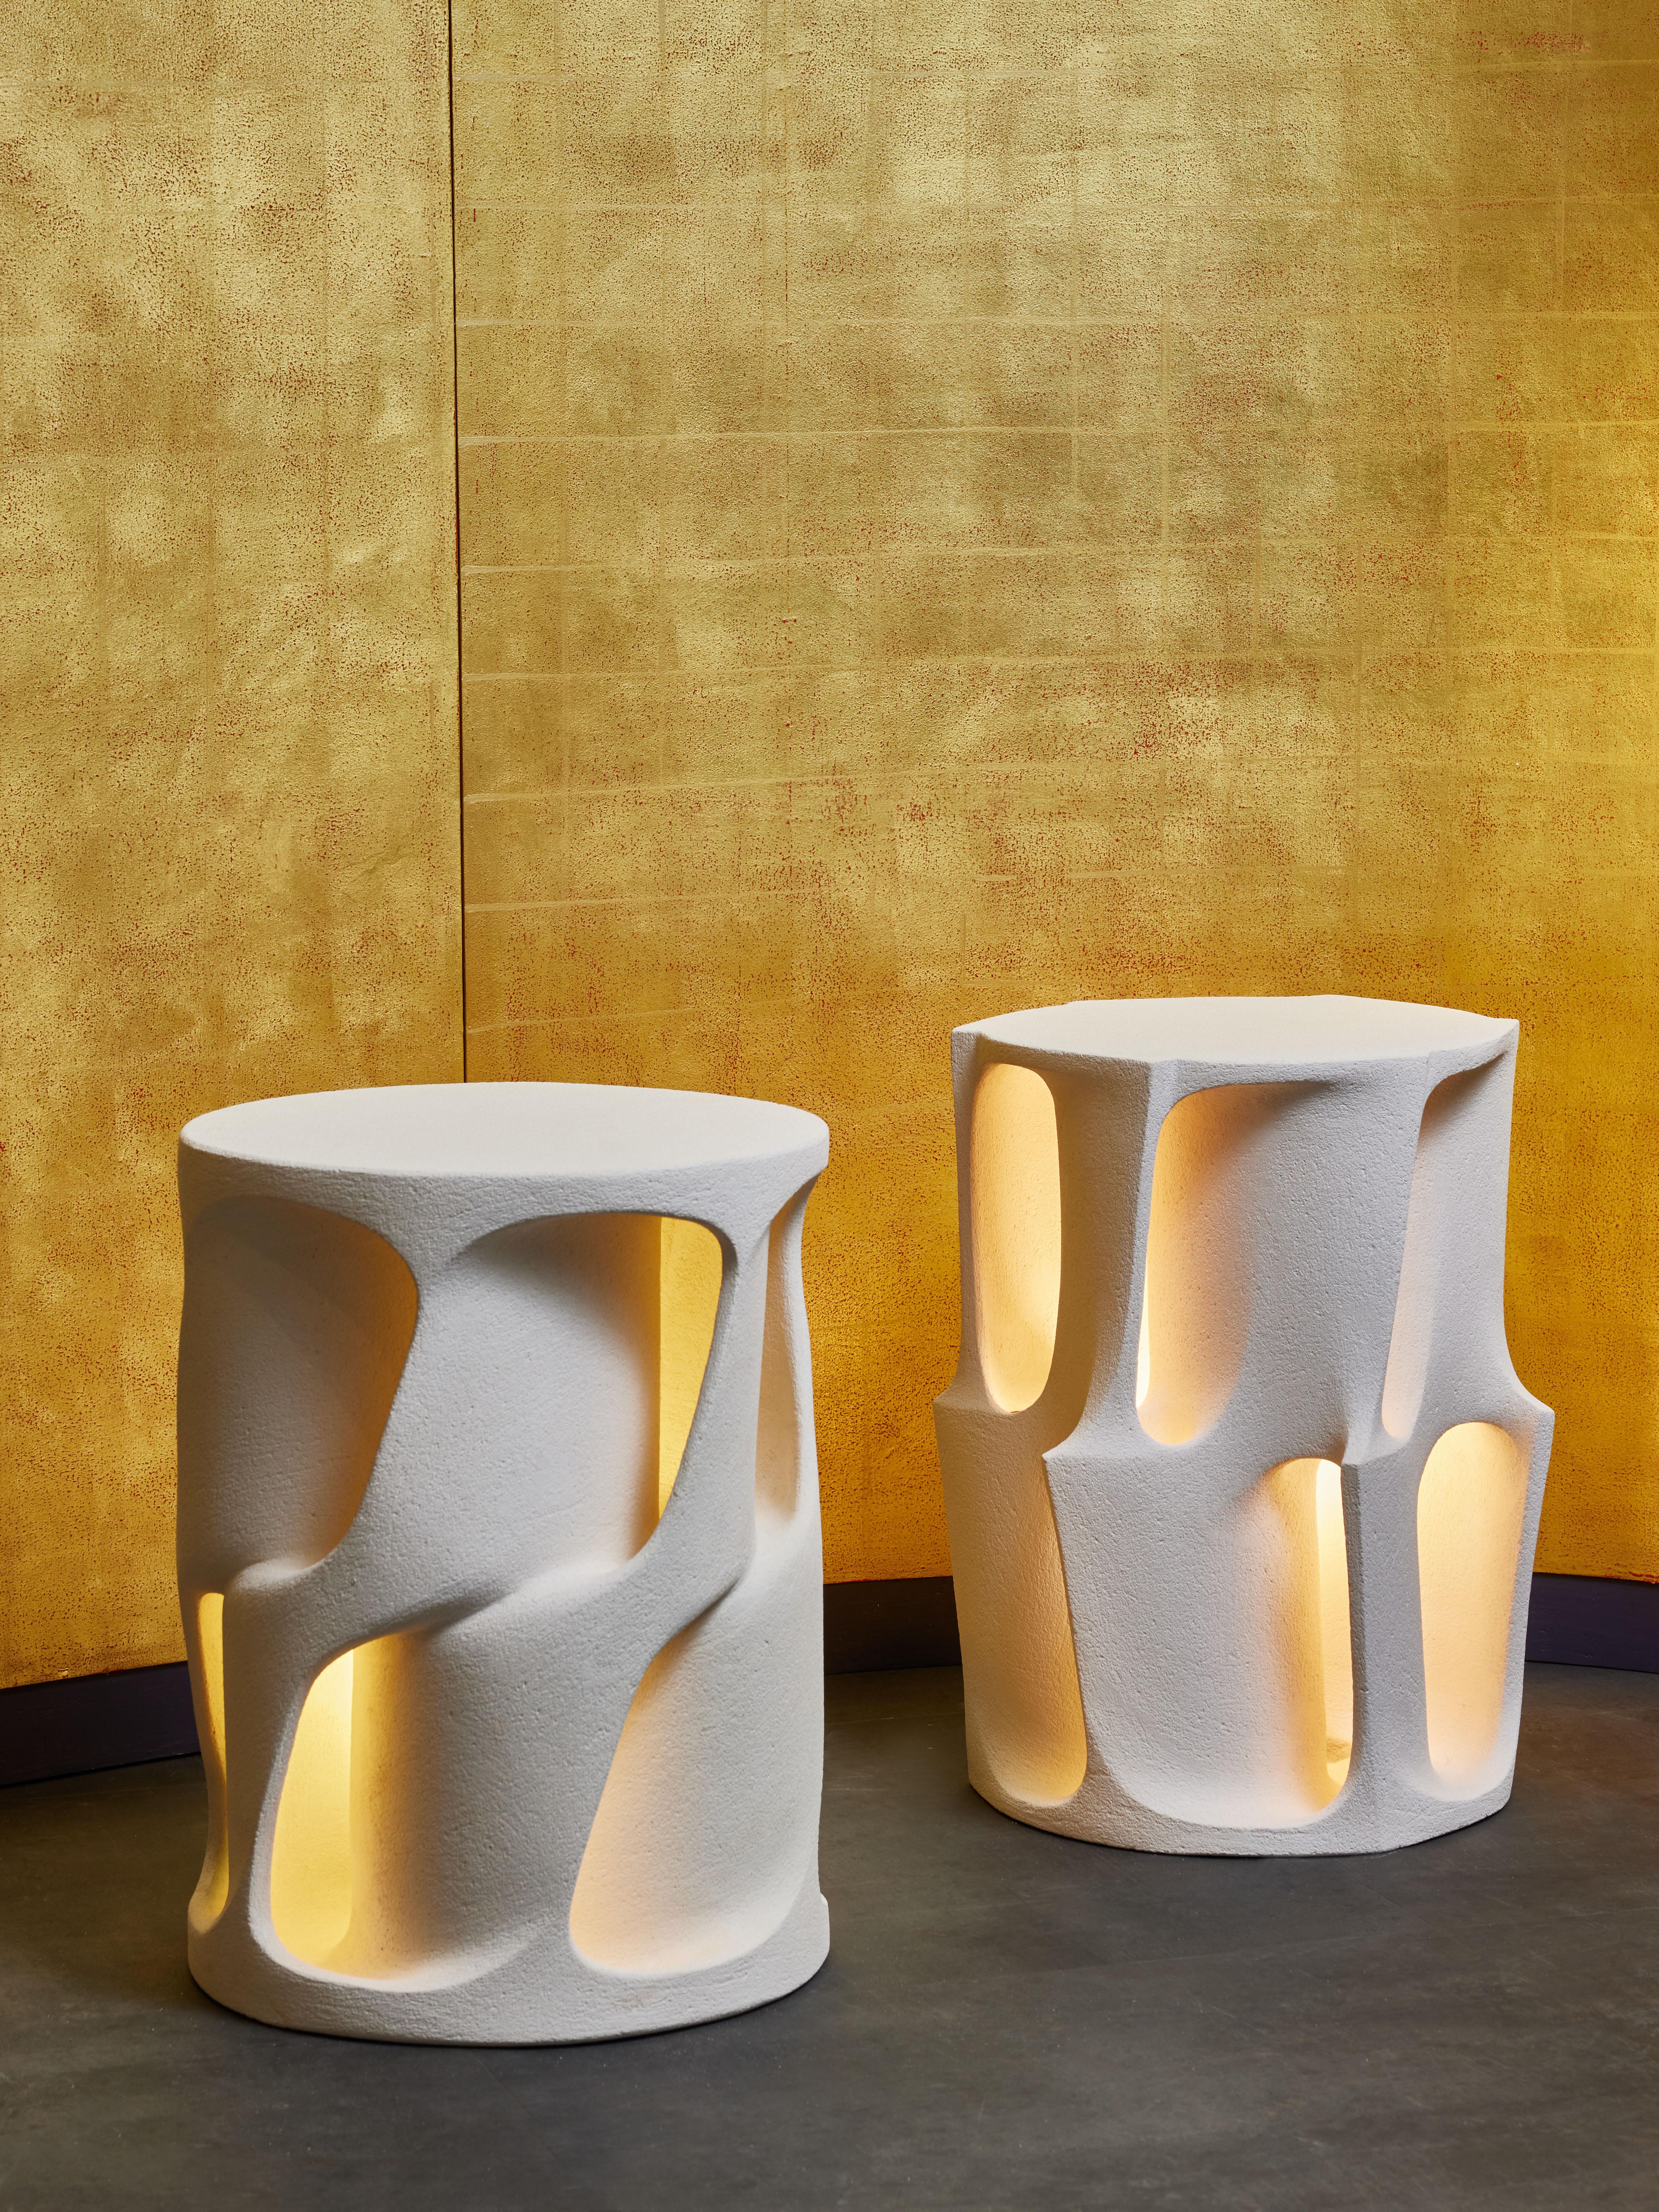 Enlighten ceramic pieces by Guy Bareff, that could be used as stools, side tables floor lamps or table lamps.

Each piece is made of a single bloc of ceramic with side vents to let the light go through.

Signed and numbered

GUY BAREFF – Born in